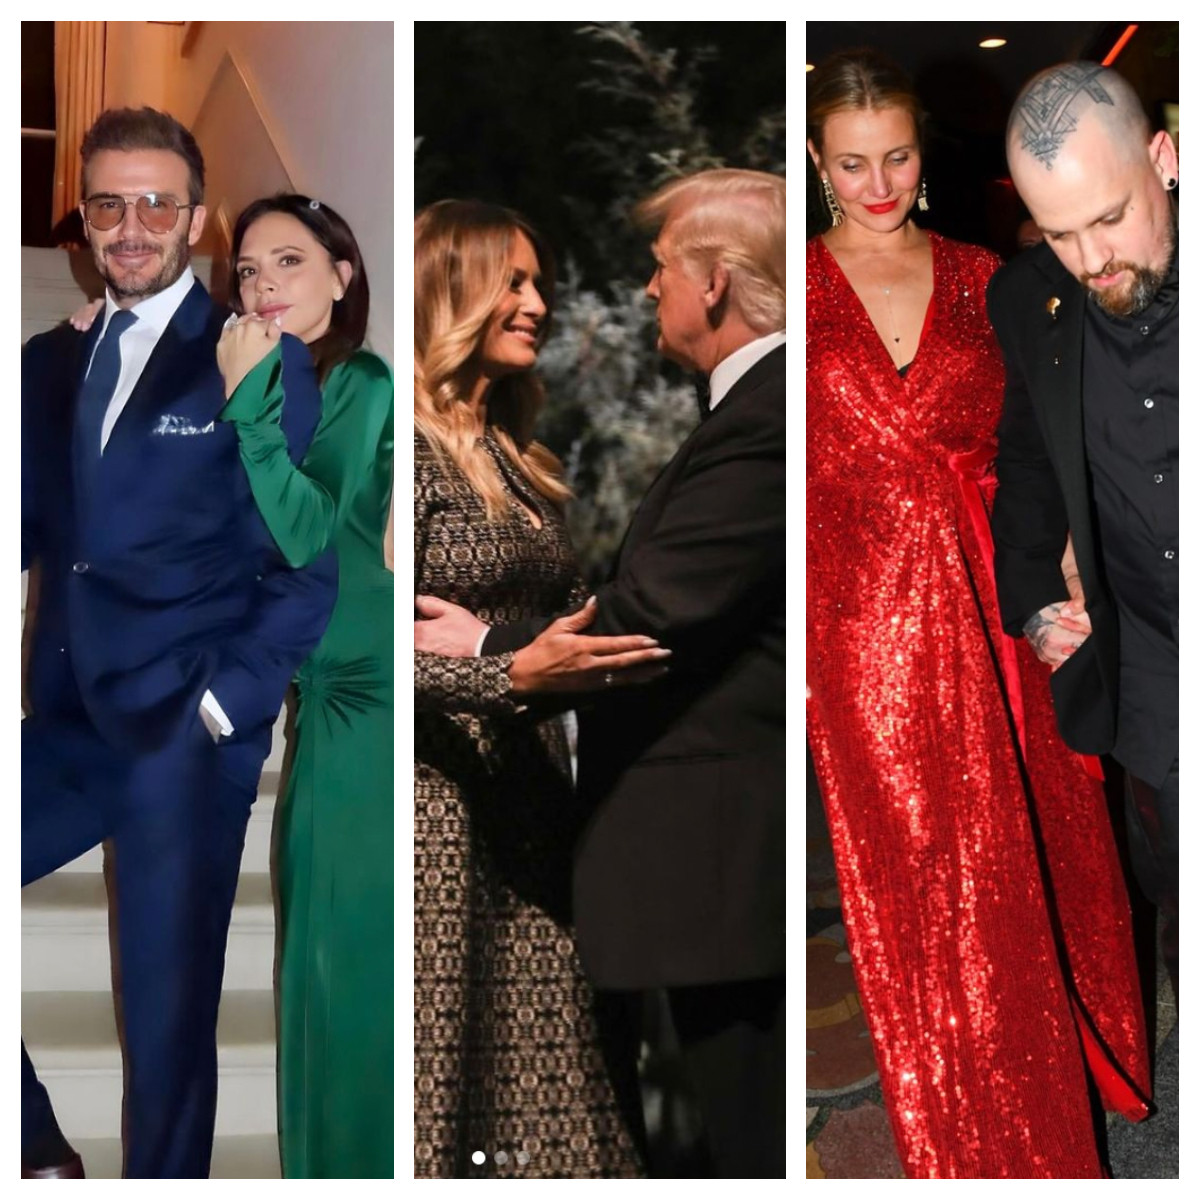 From David and Victoria Beckham to Melania and Donald Trump and Cameron Diaz and Benji Madden, all these famous couples regularly sleep is separate beds.
Photos: @__beckham75__; @melaniatrump_iconic; @hollywoodlife/Instagram